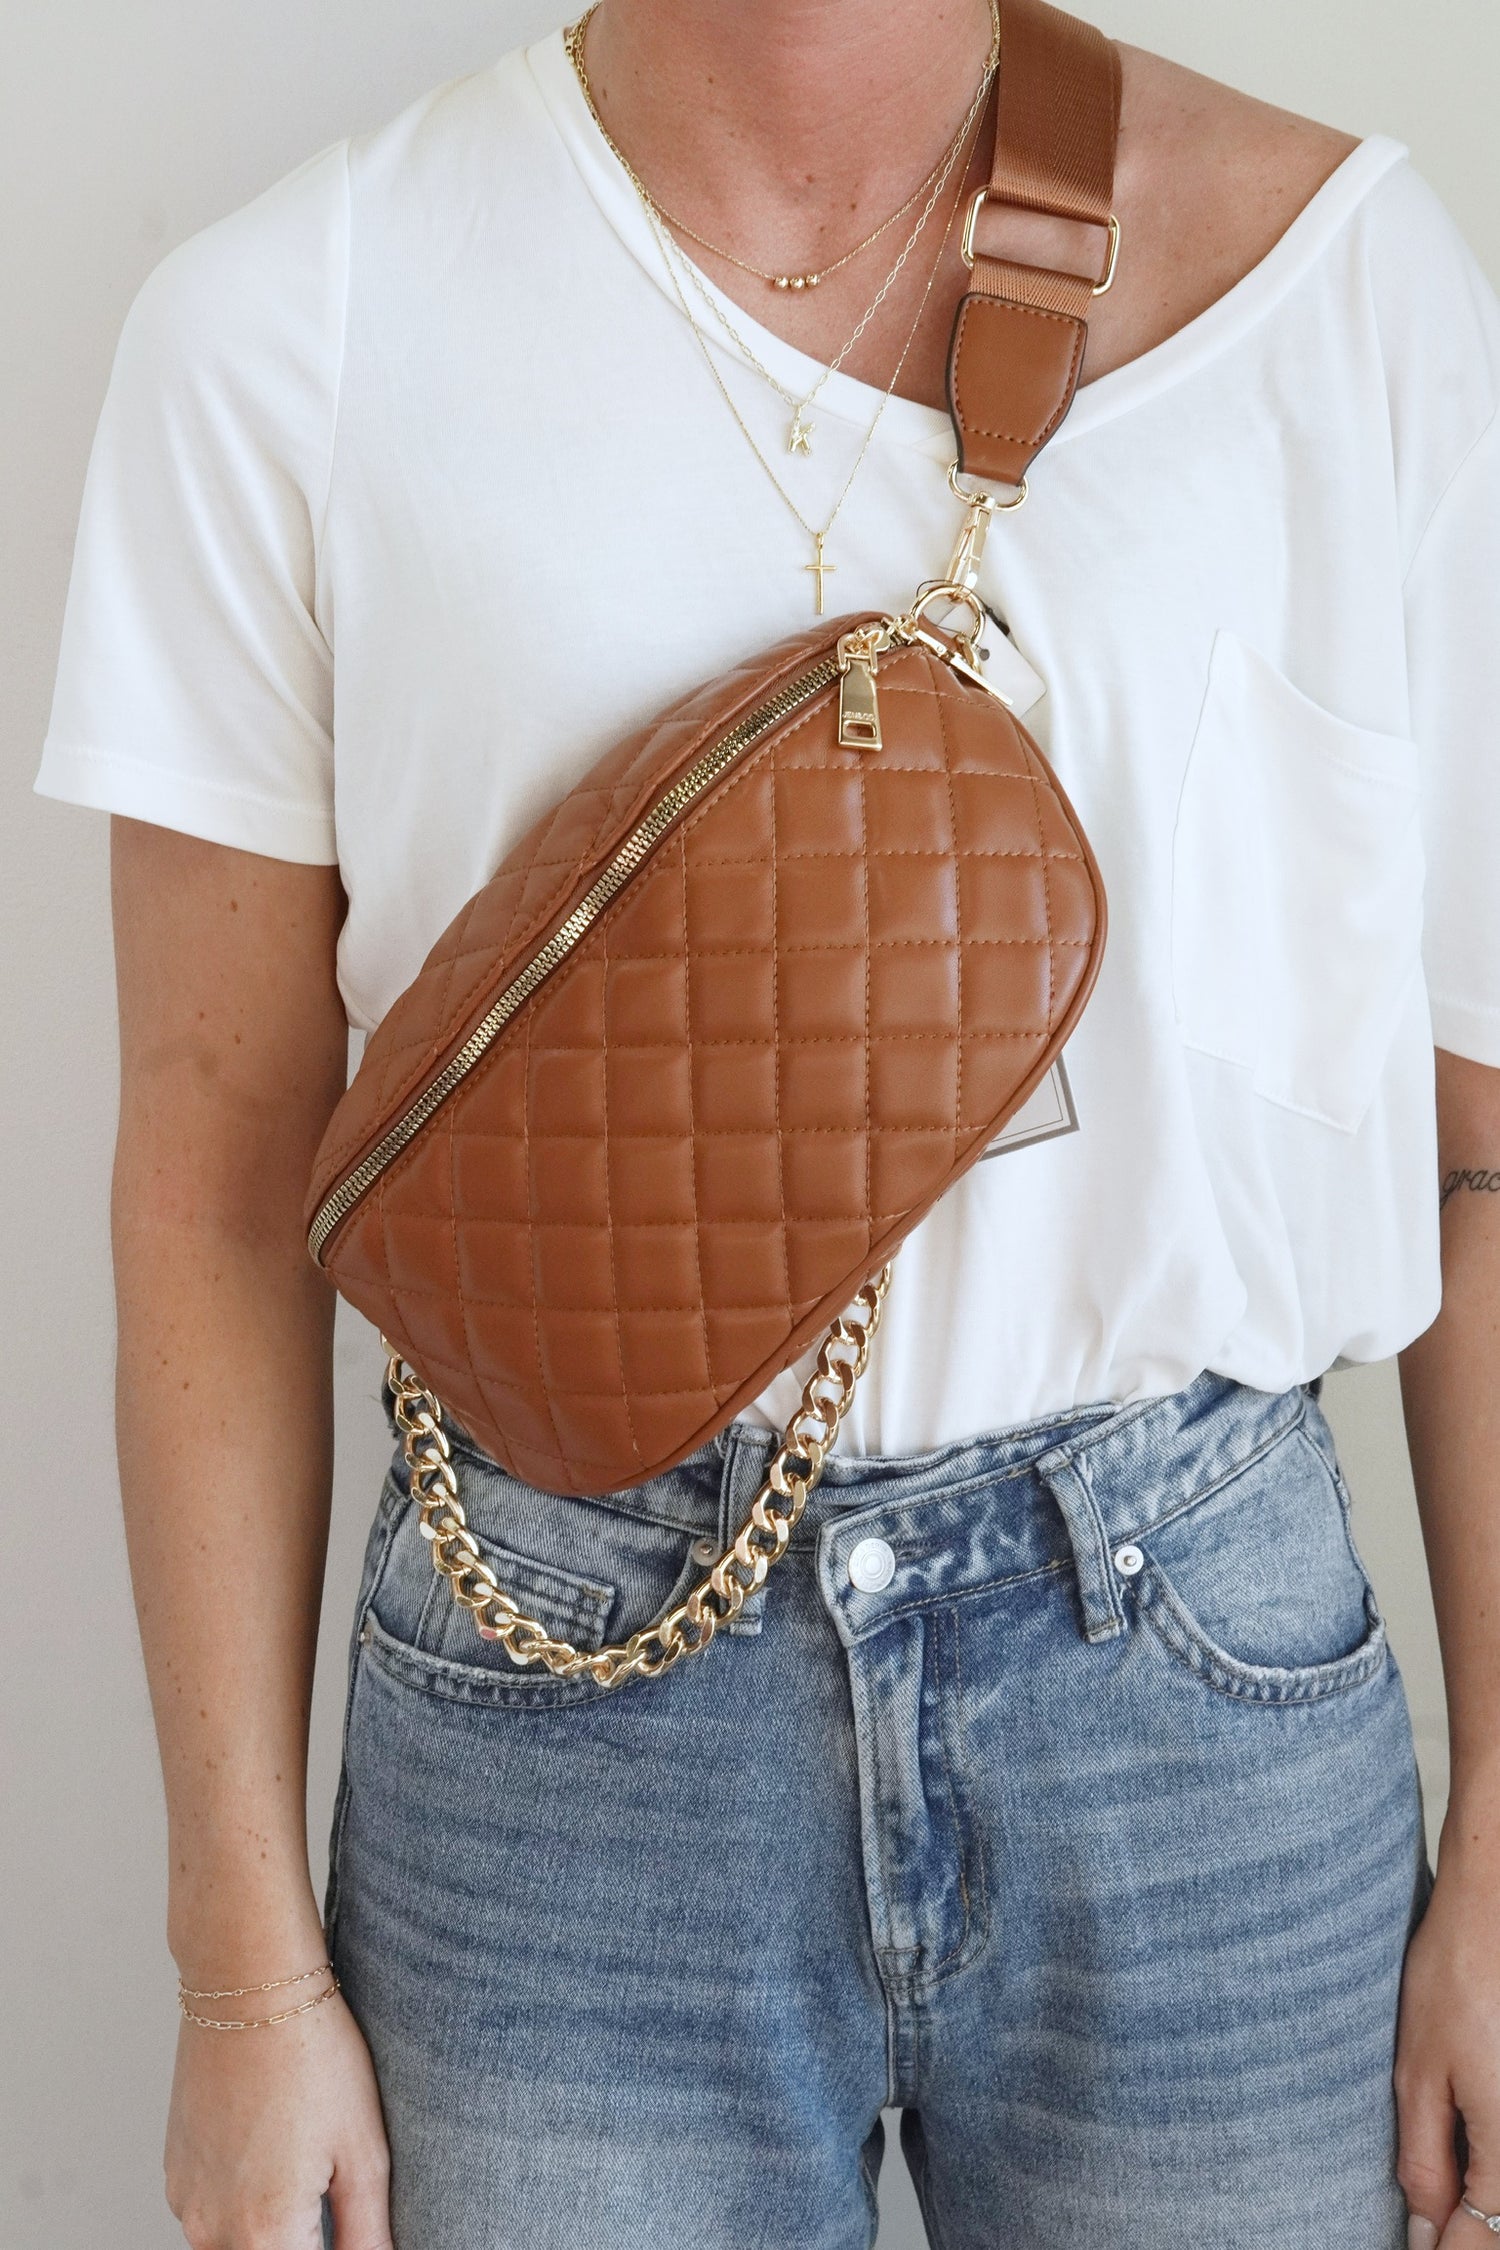 Sylvie Quilted Vegan Leather Bum Bag Removable Crossbody or Belt Strap Back Zipper Pocket Small Inner Zipper Pocket Ten Card Slots Gold Chain Detail Approx 10 1/2 in x 6 1/2 in x 4 in. brown color